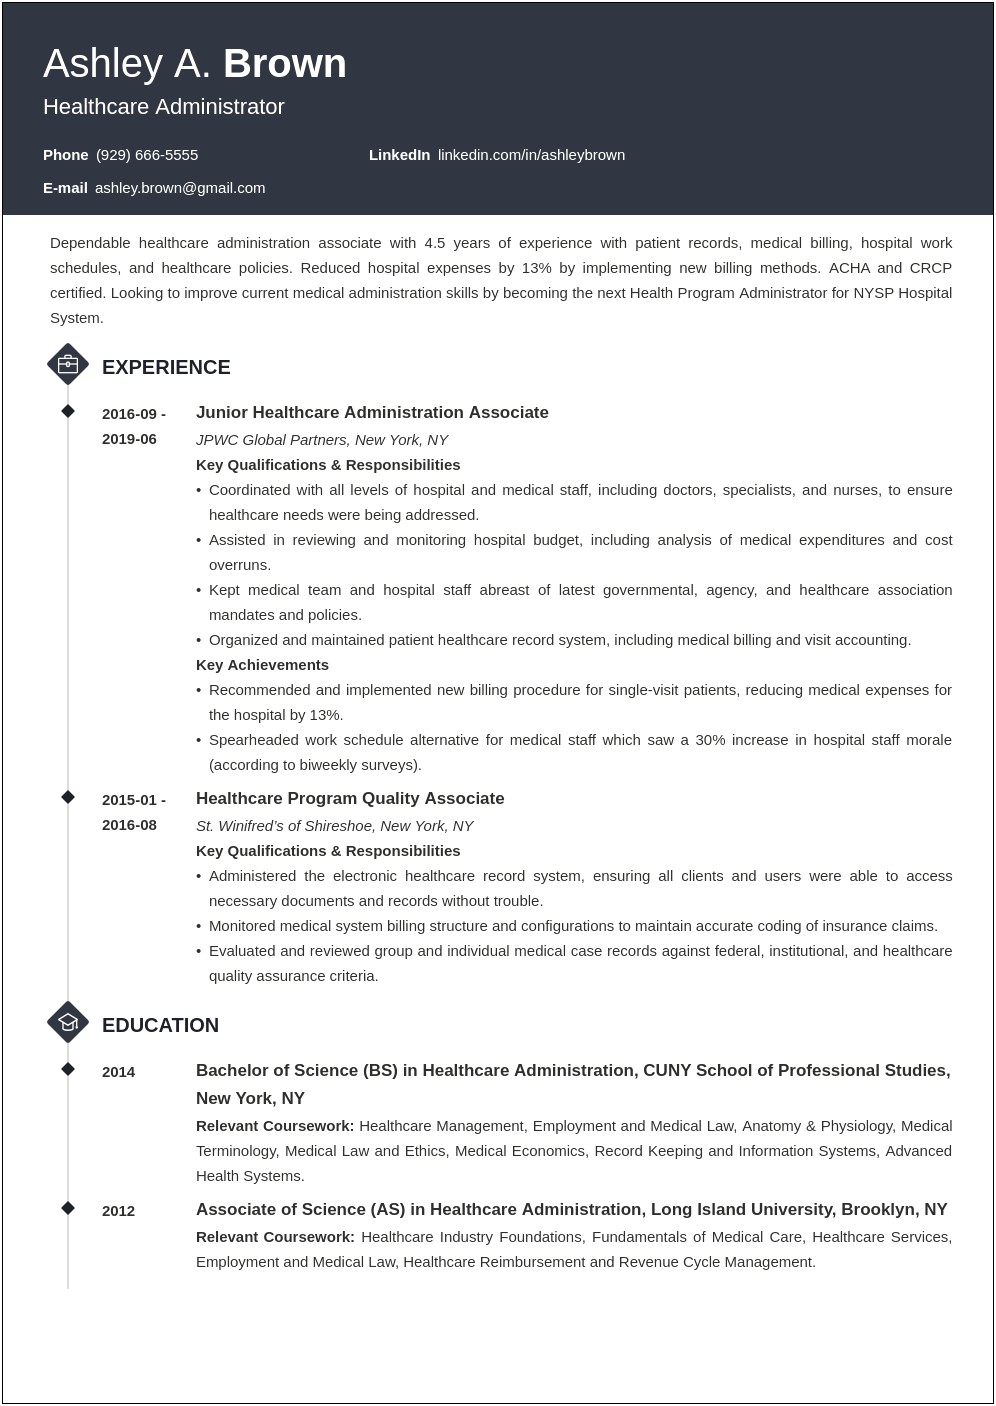 Resume Professional Summary Examples Healthcare